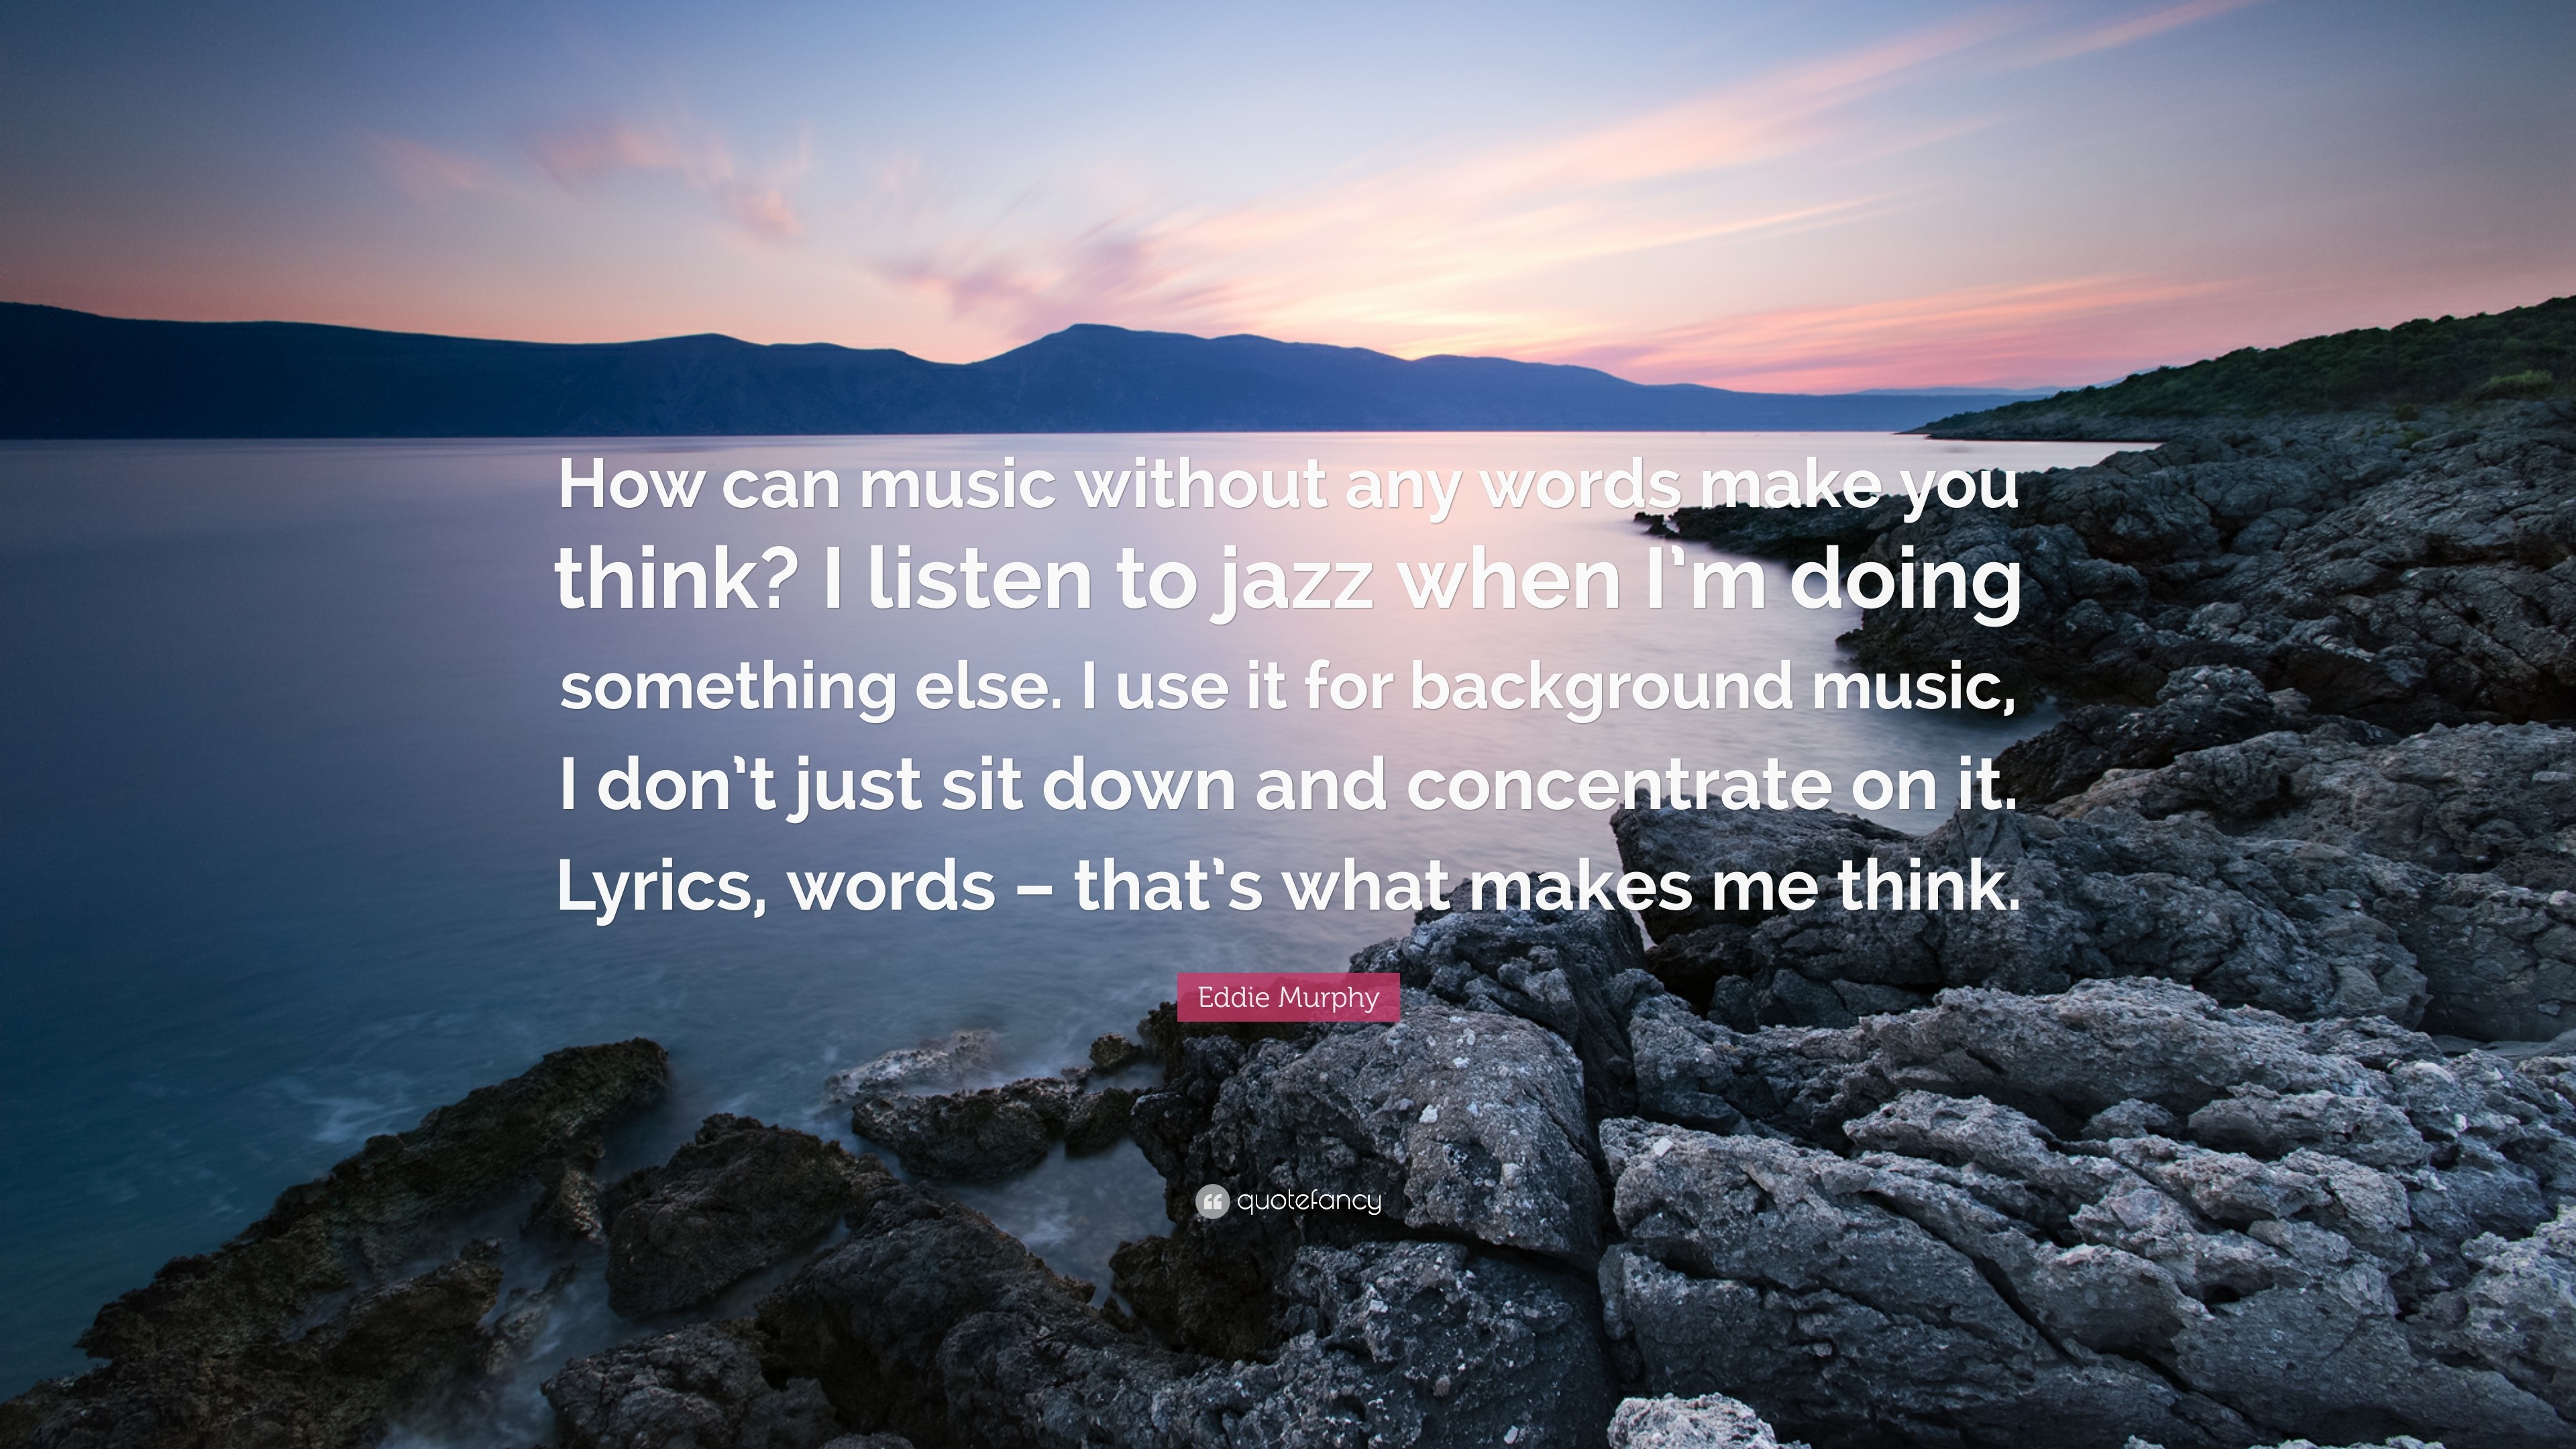 Eddie Murphy Quote: “How can music without any words make you think? I  listen to jazz when I'm doing something else. I use it for background ...”